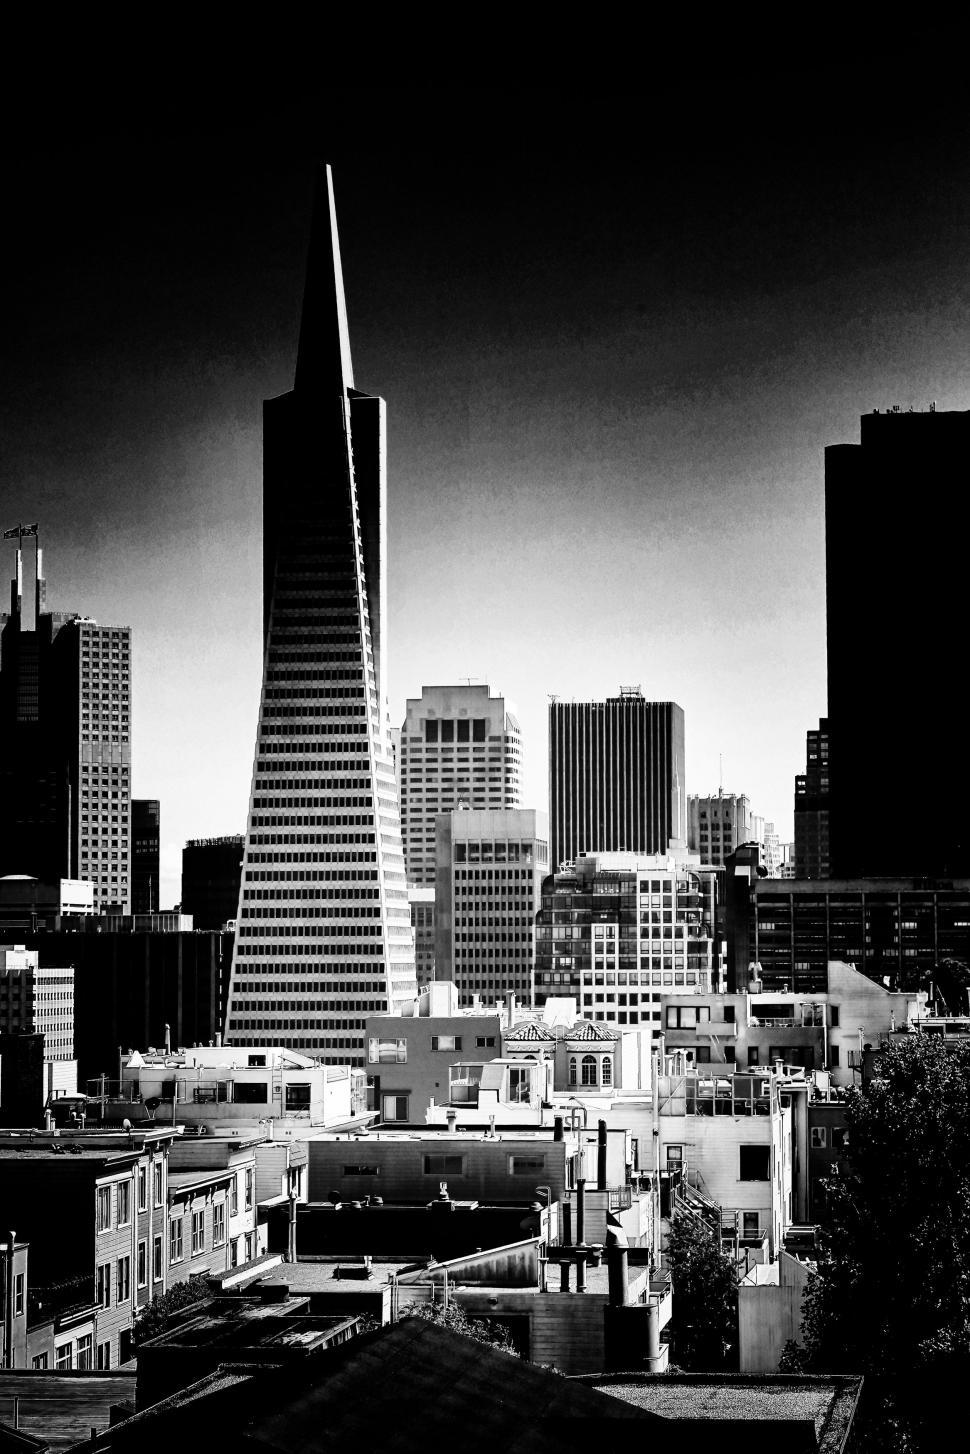 Free Image of Urban Skyline in Black and White 